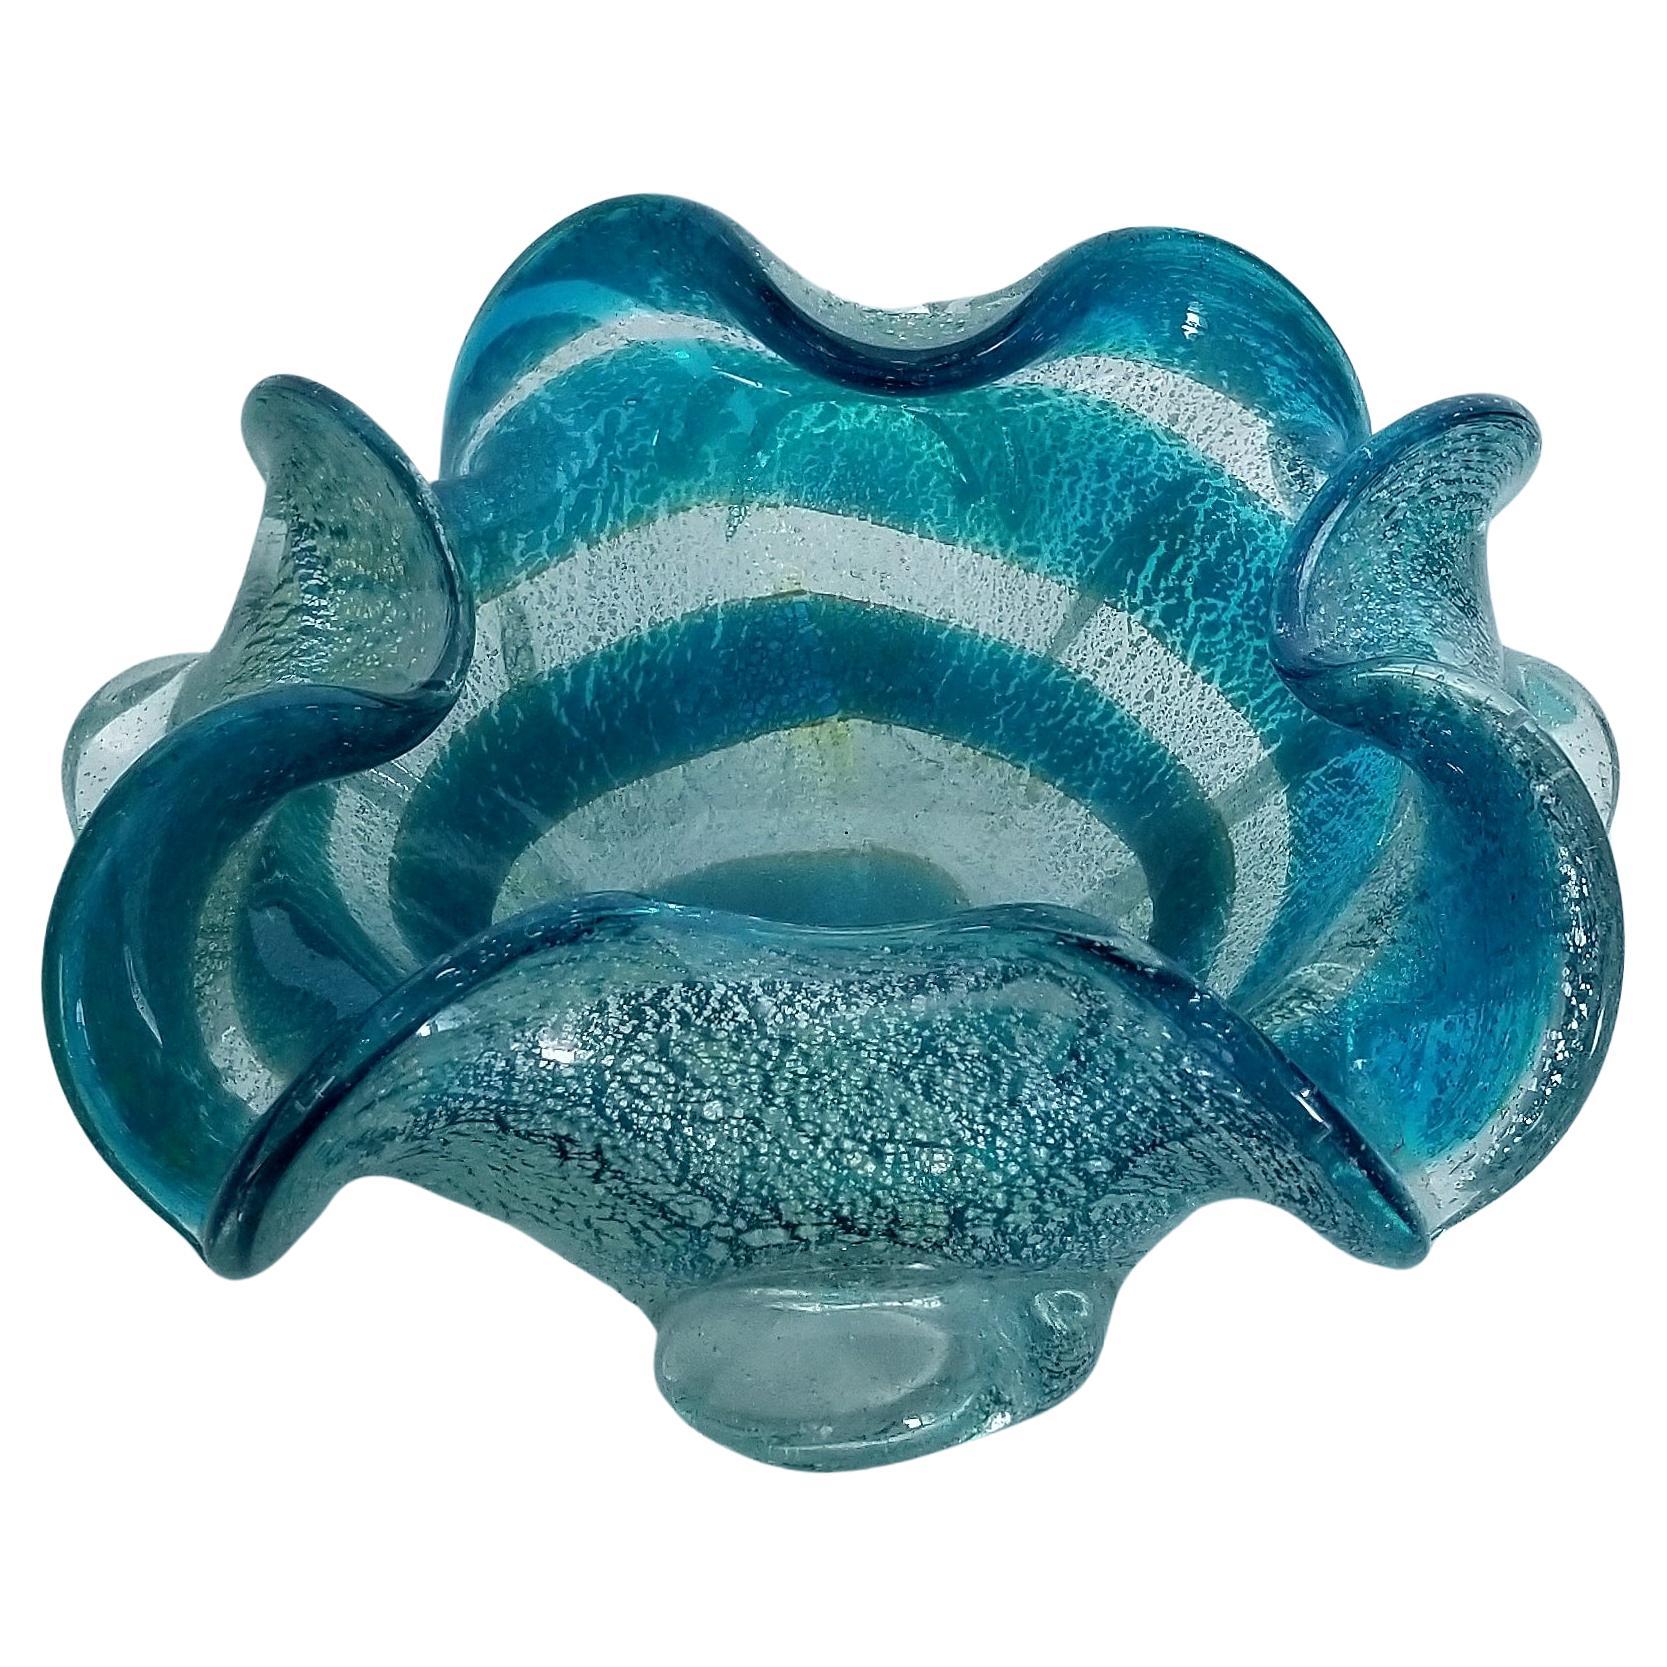 Art Glass Blue and Silver Murano Glass Ashtray or Catch-all Bowl For Sale